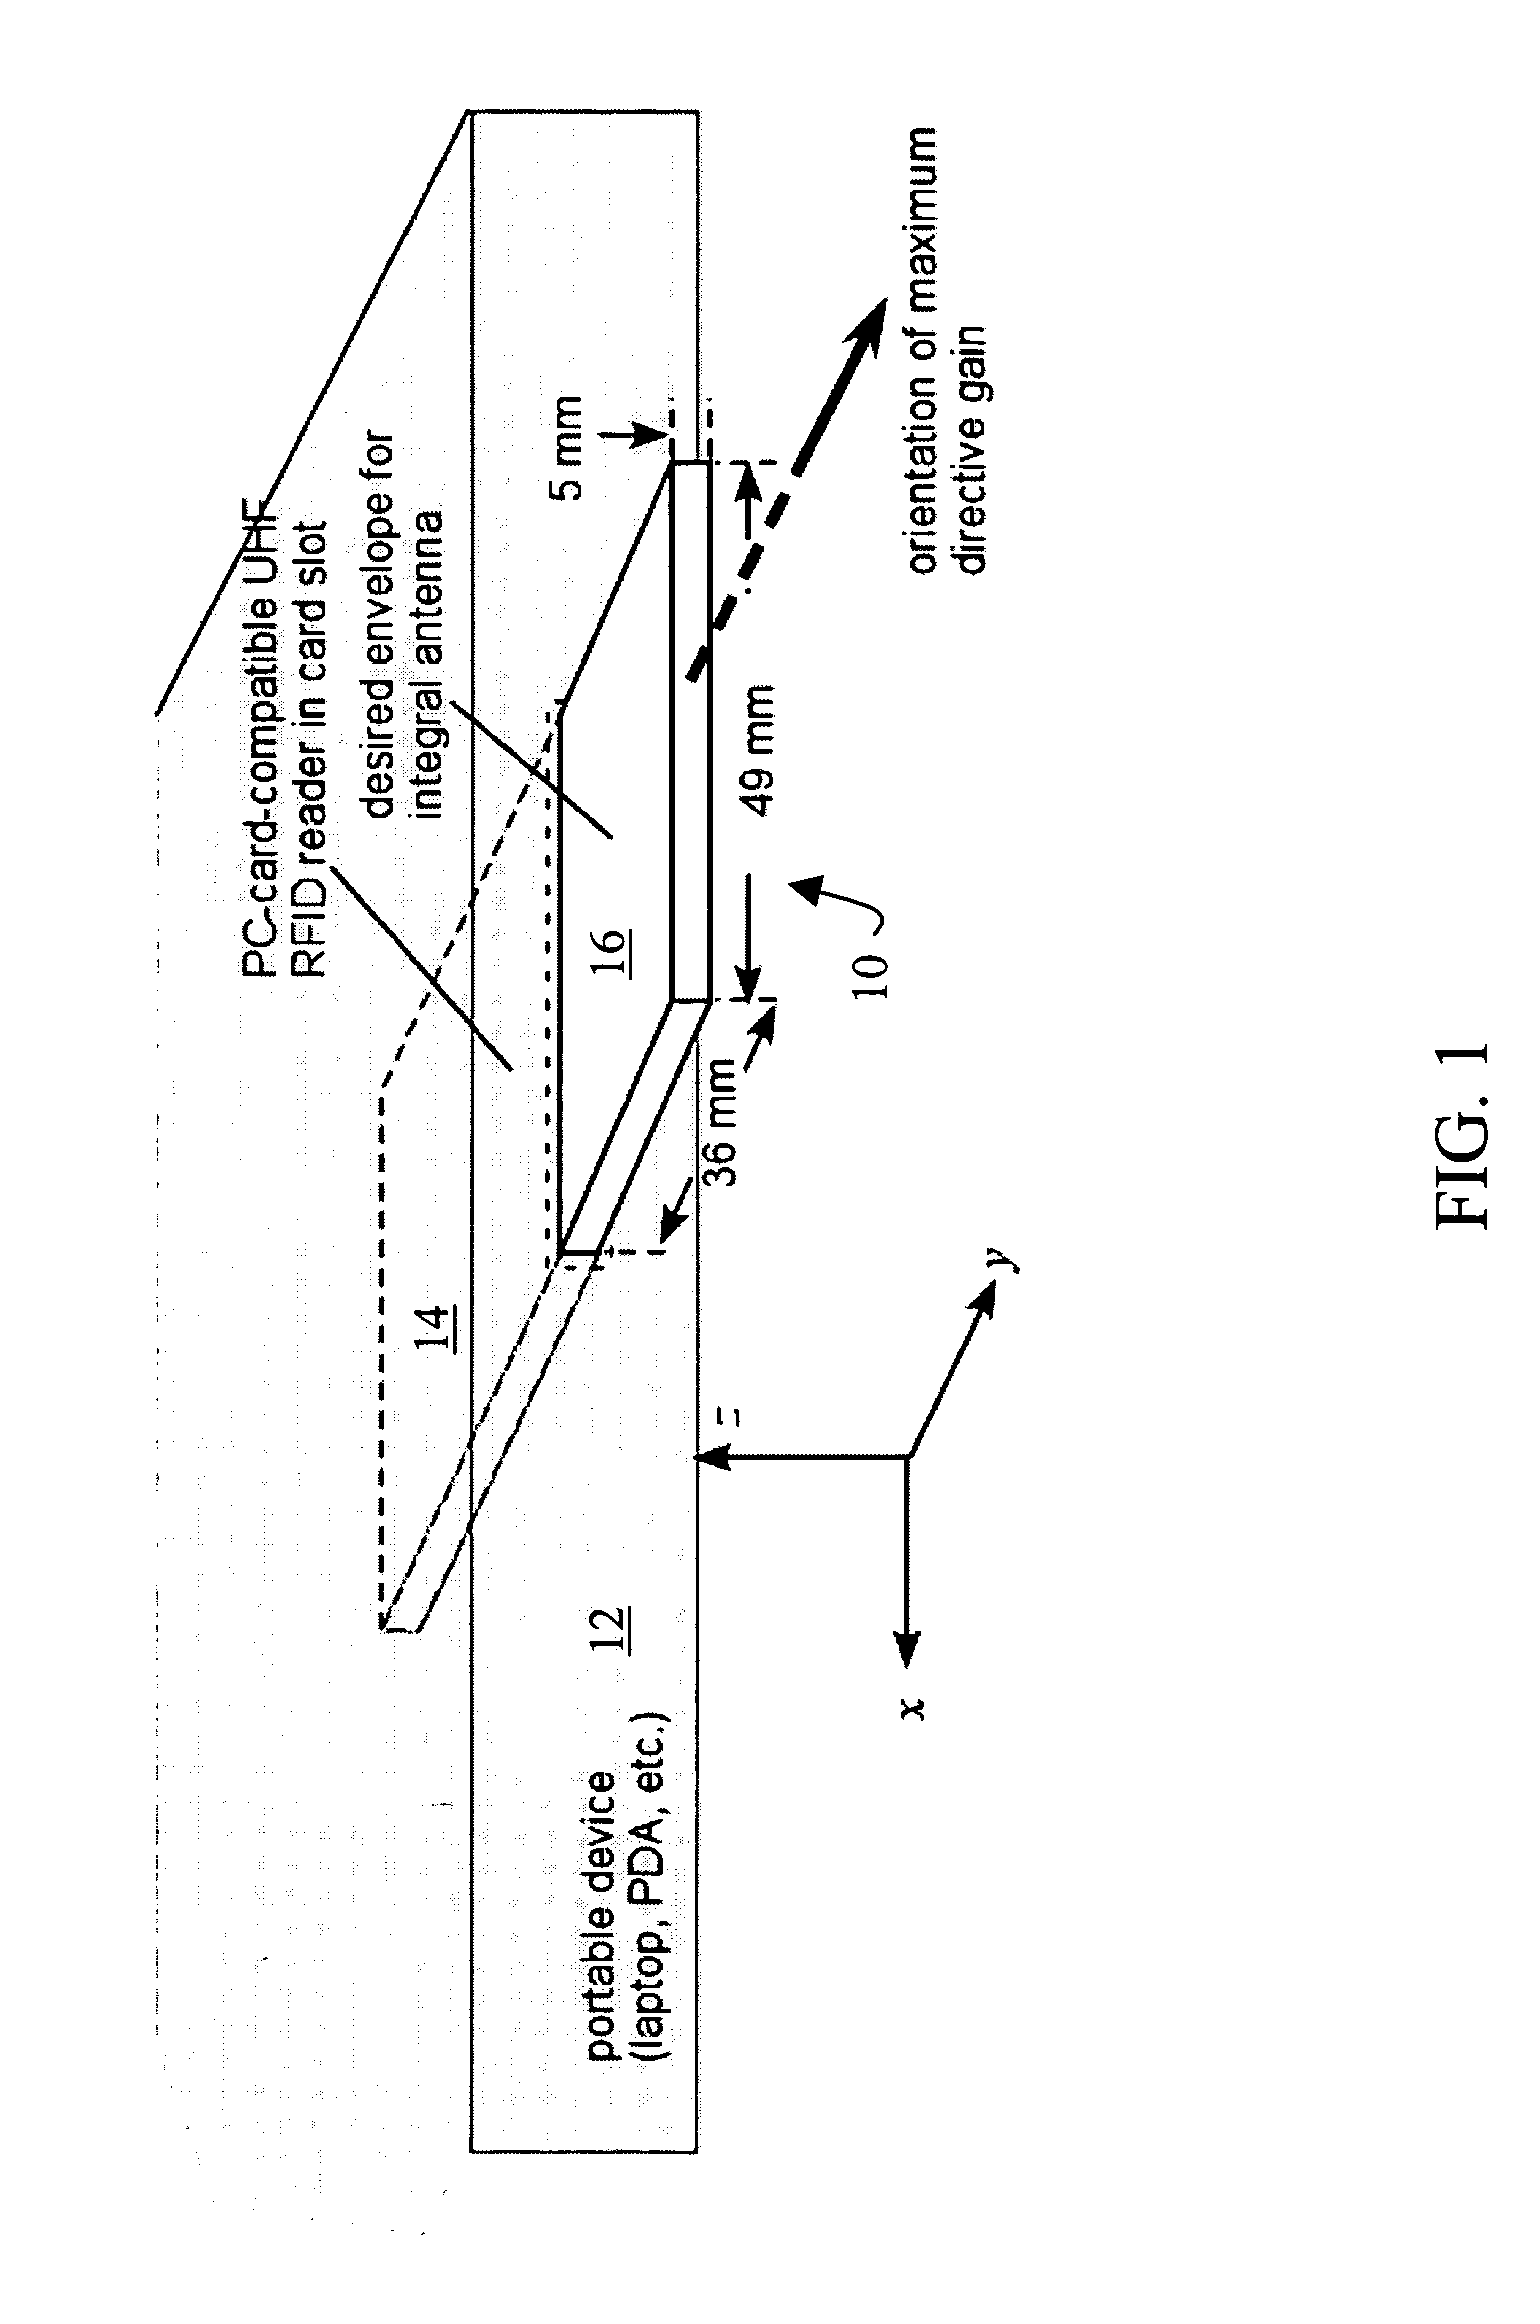 Compact antenna with directed radiation pattern